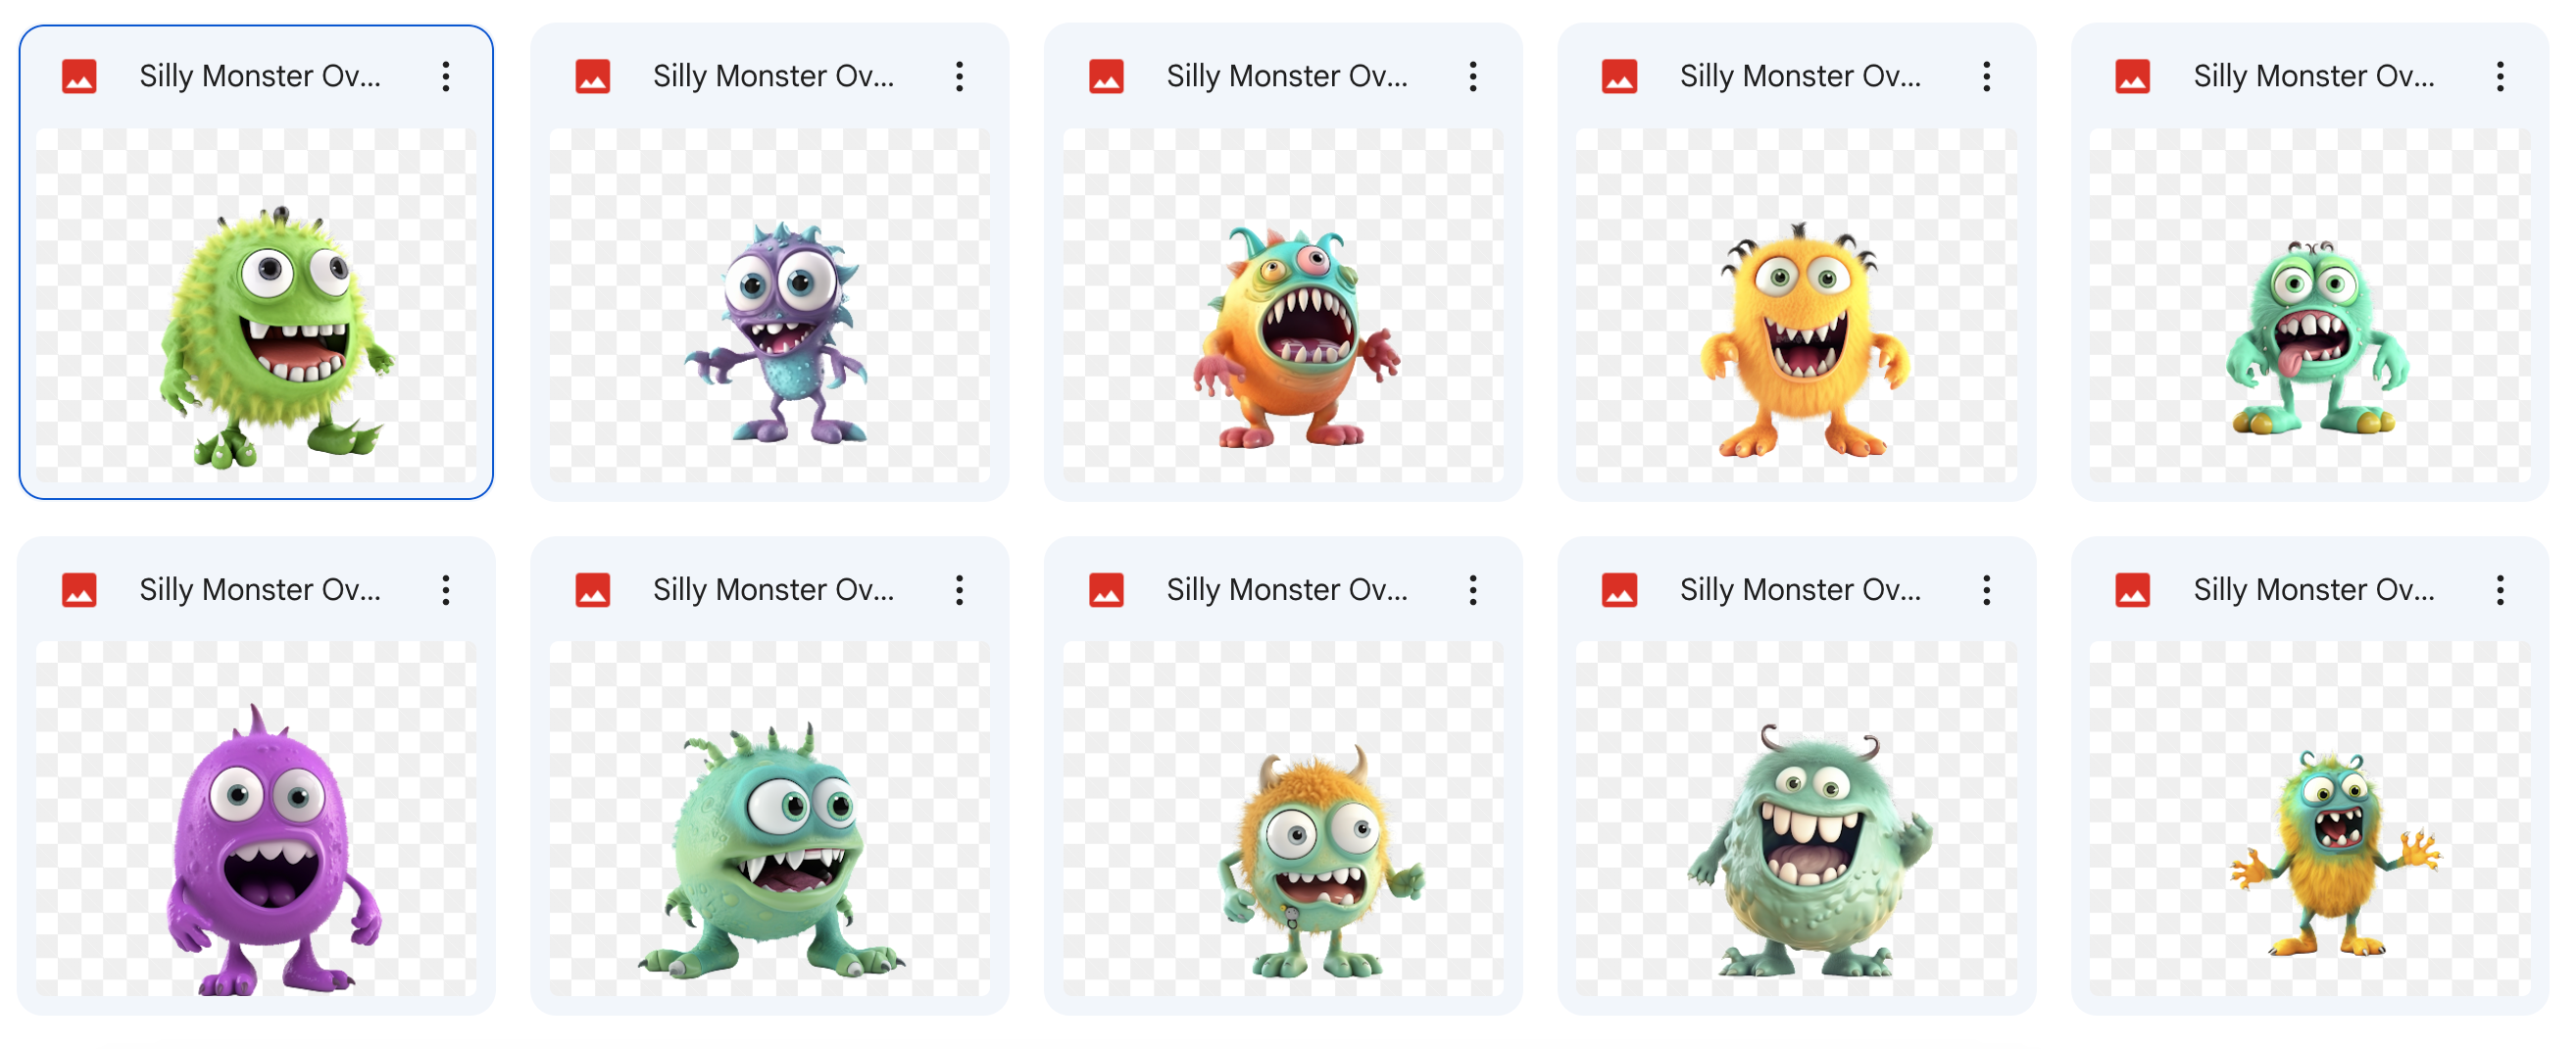 Magical Silly Monsters - Meg Bitton Productions